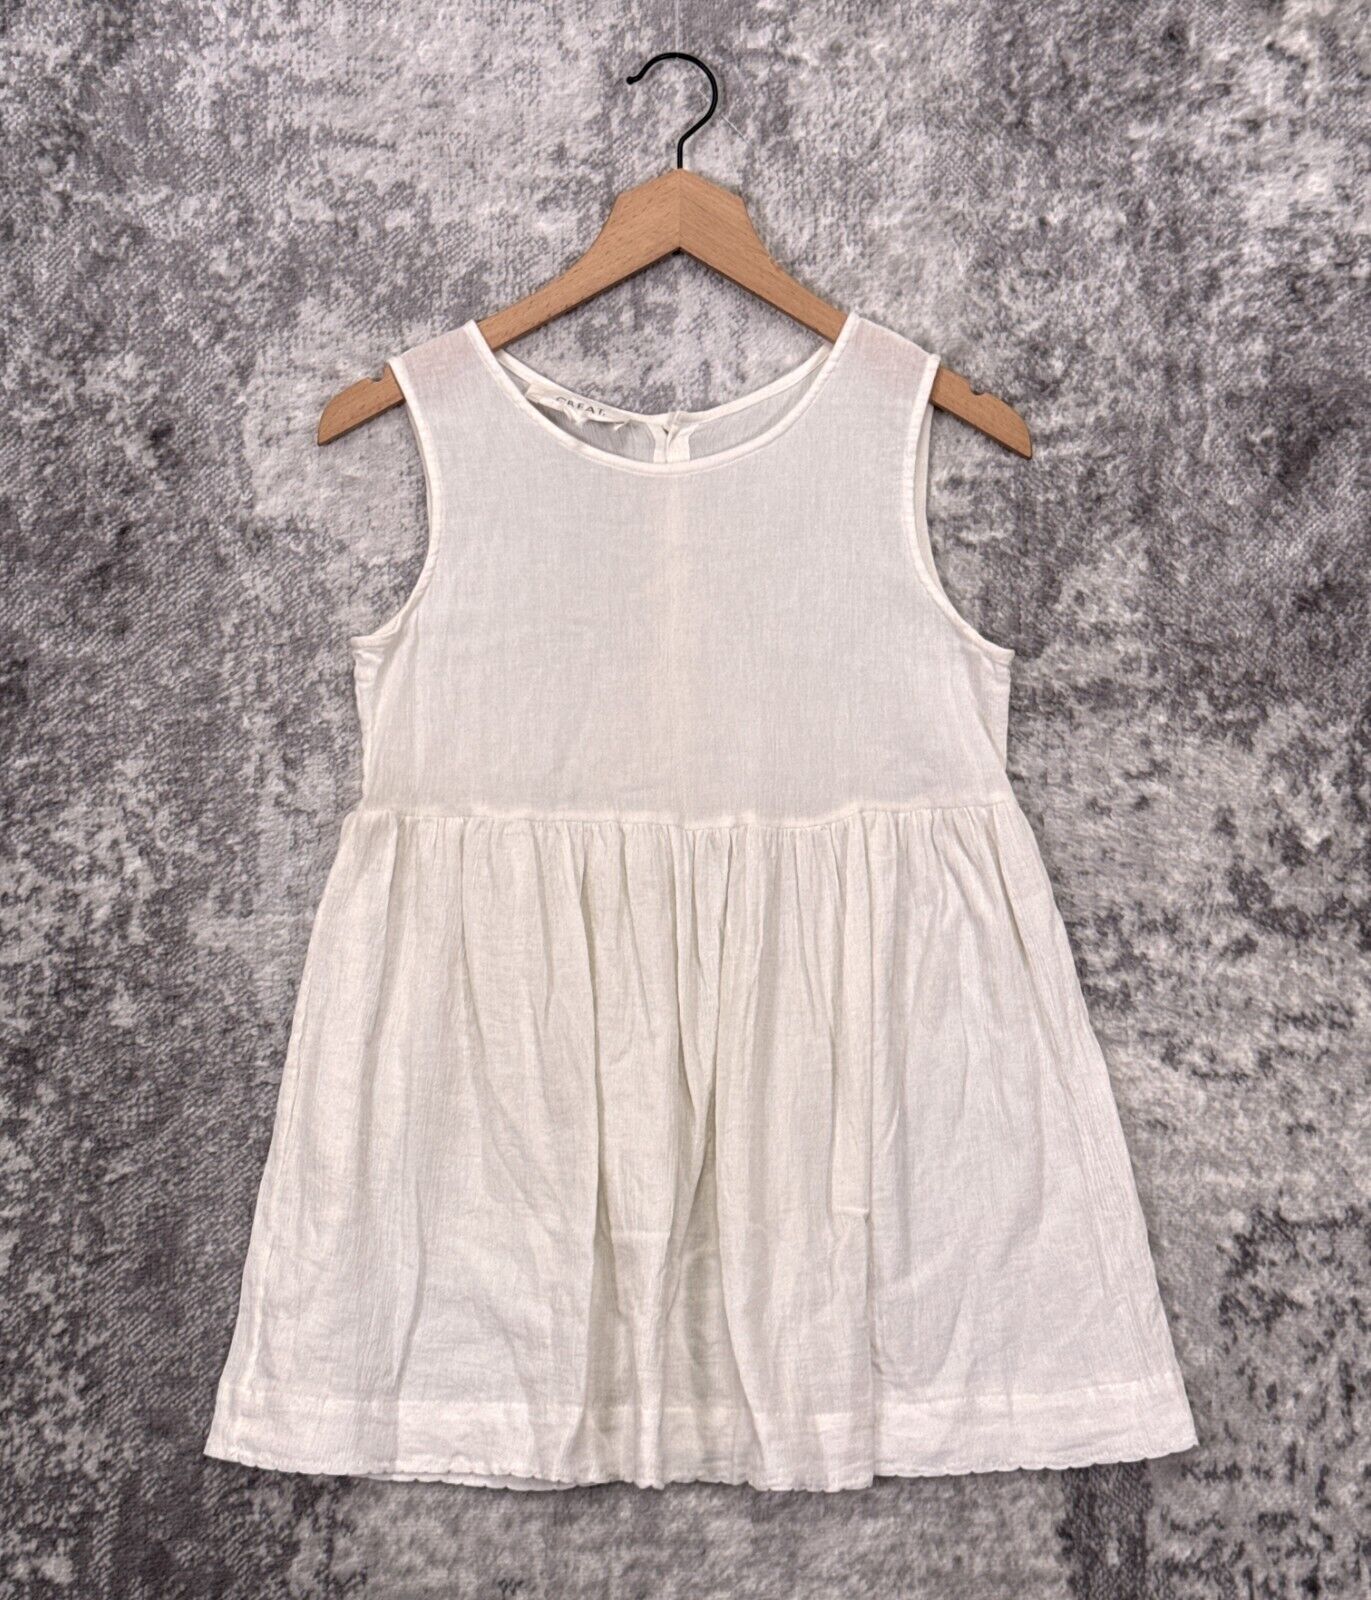 THE GREAT Top Small Womens White Lightweight Sheer Baby Doll Sleeveless